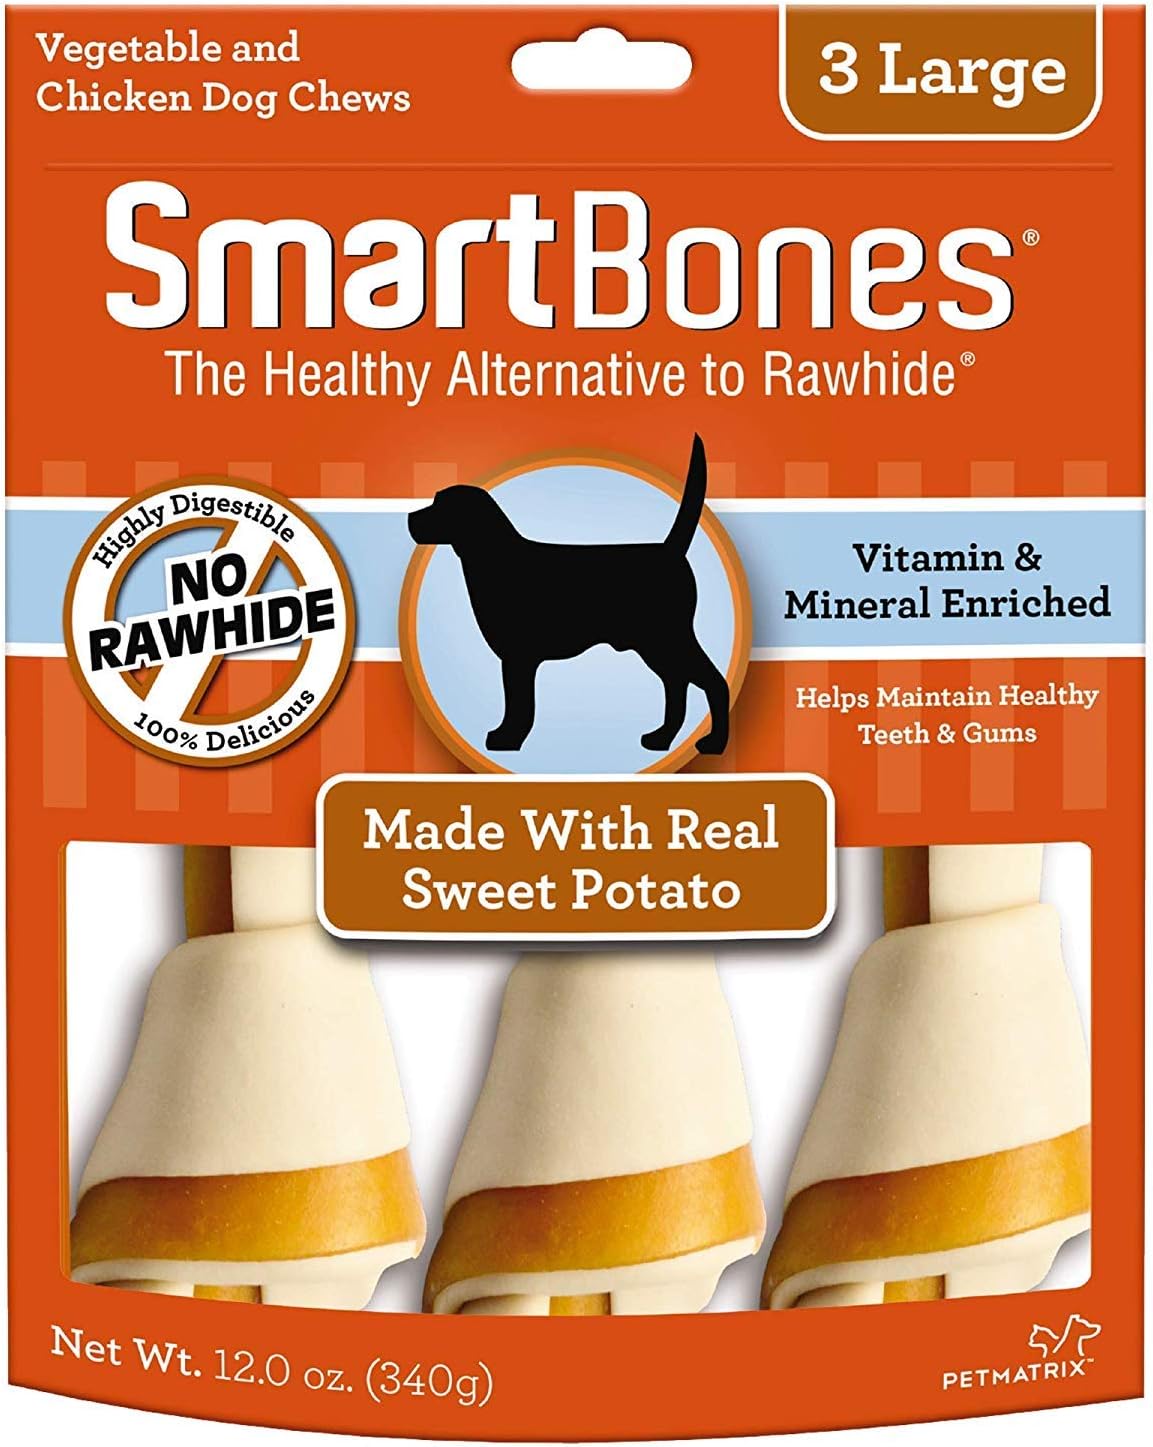 SmartBones Large Chews, Treat Your Dog to a Rawhide-Free Chew Made With Real Meat and Vegetables 3 Count (Pack of 1)